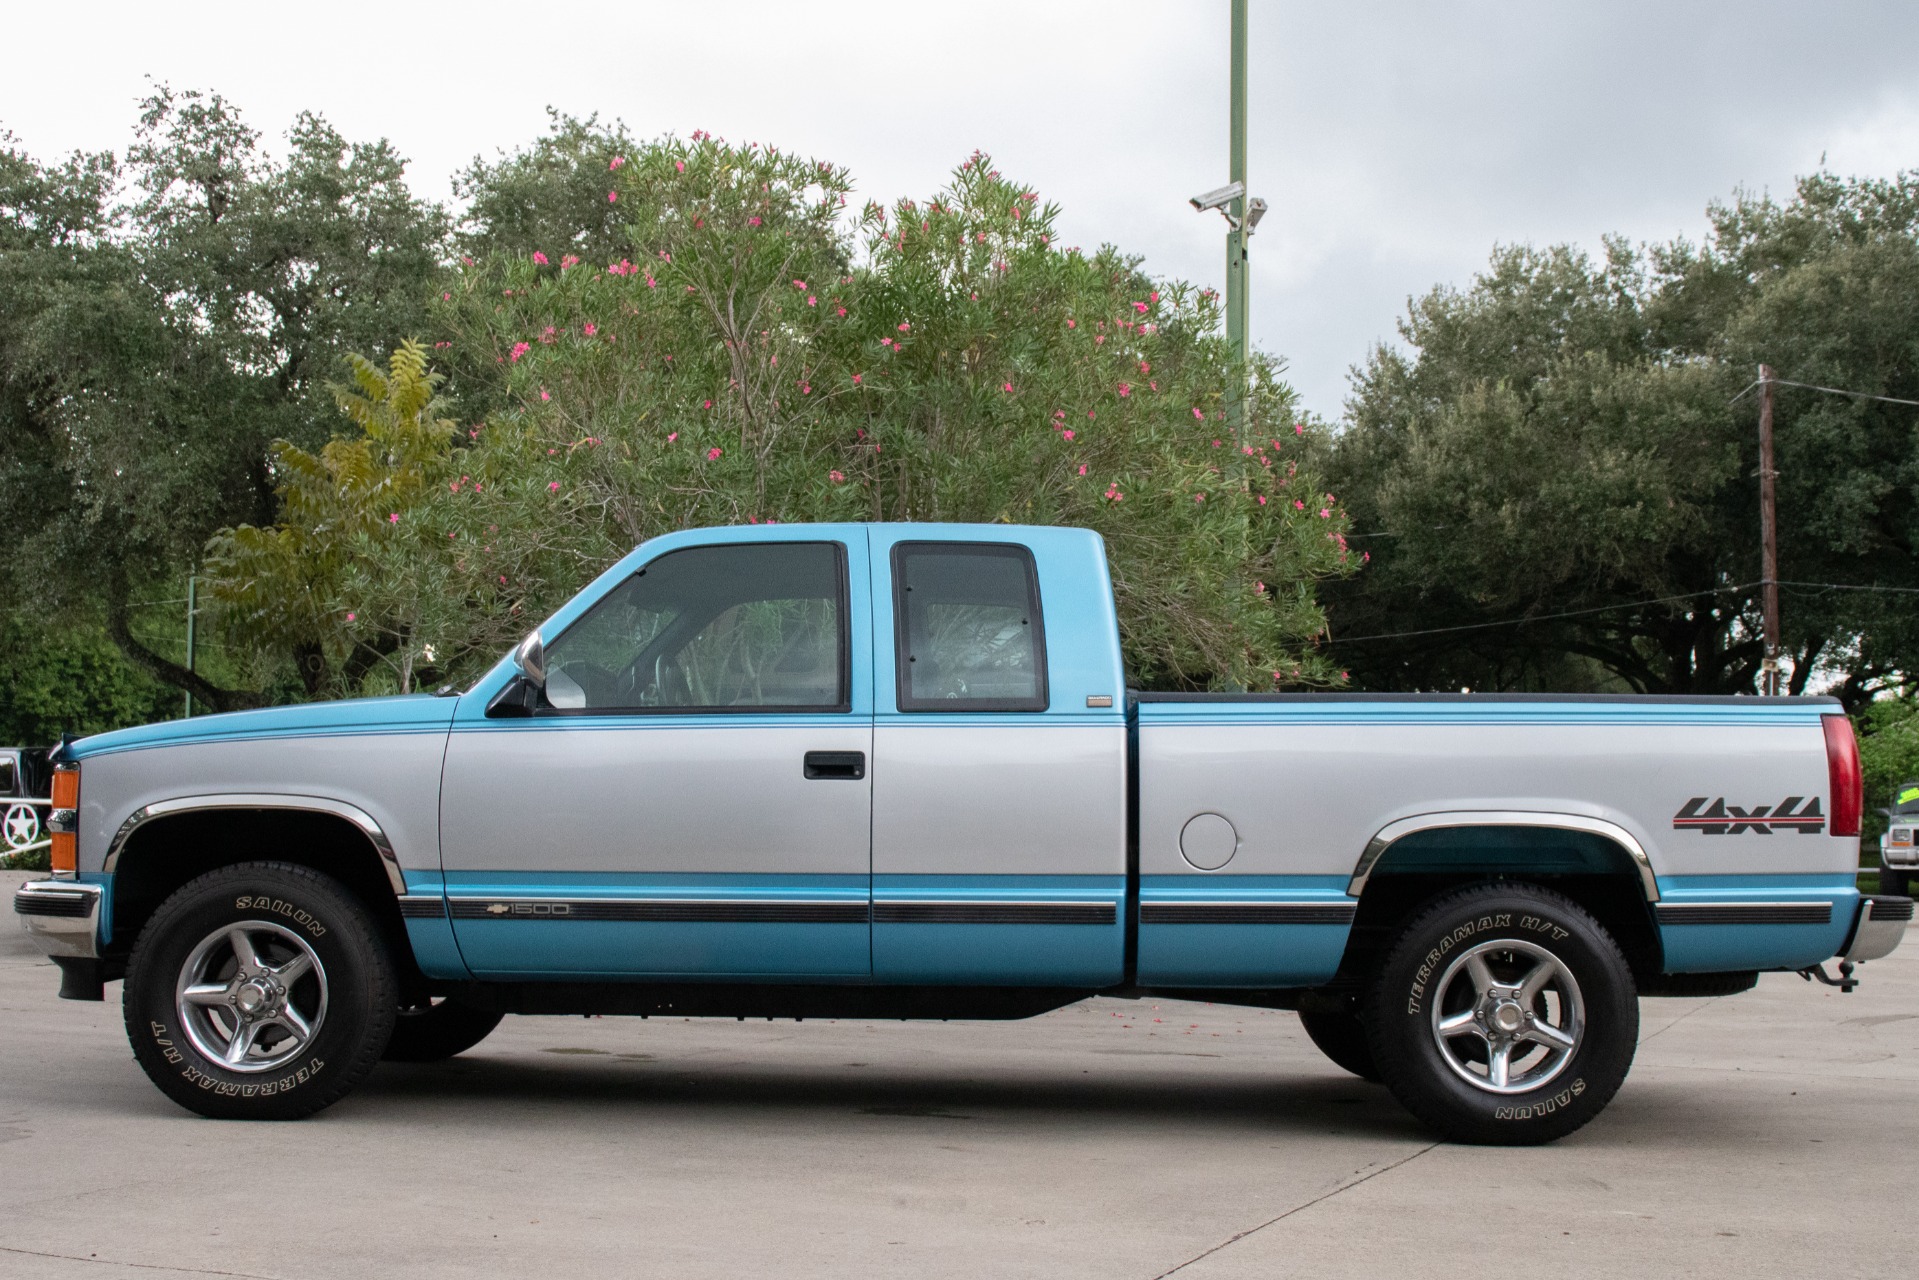 Used 1994 Chevrolet C K 1500 Series K1500 Cheyenne For Sale 15 995 Select Jeeps Inc Stock